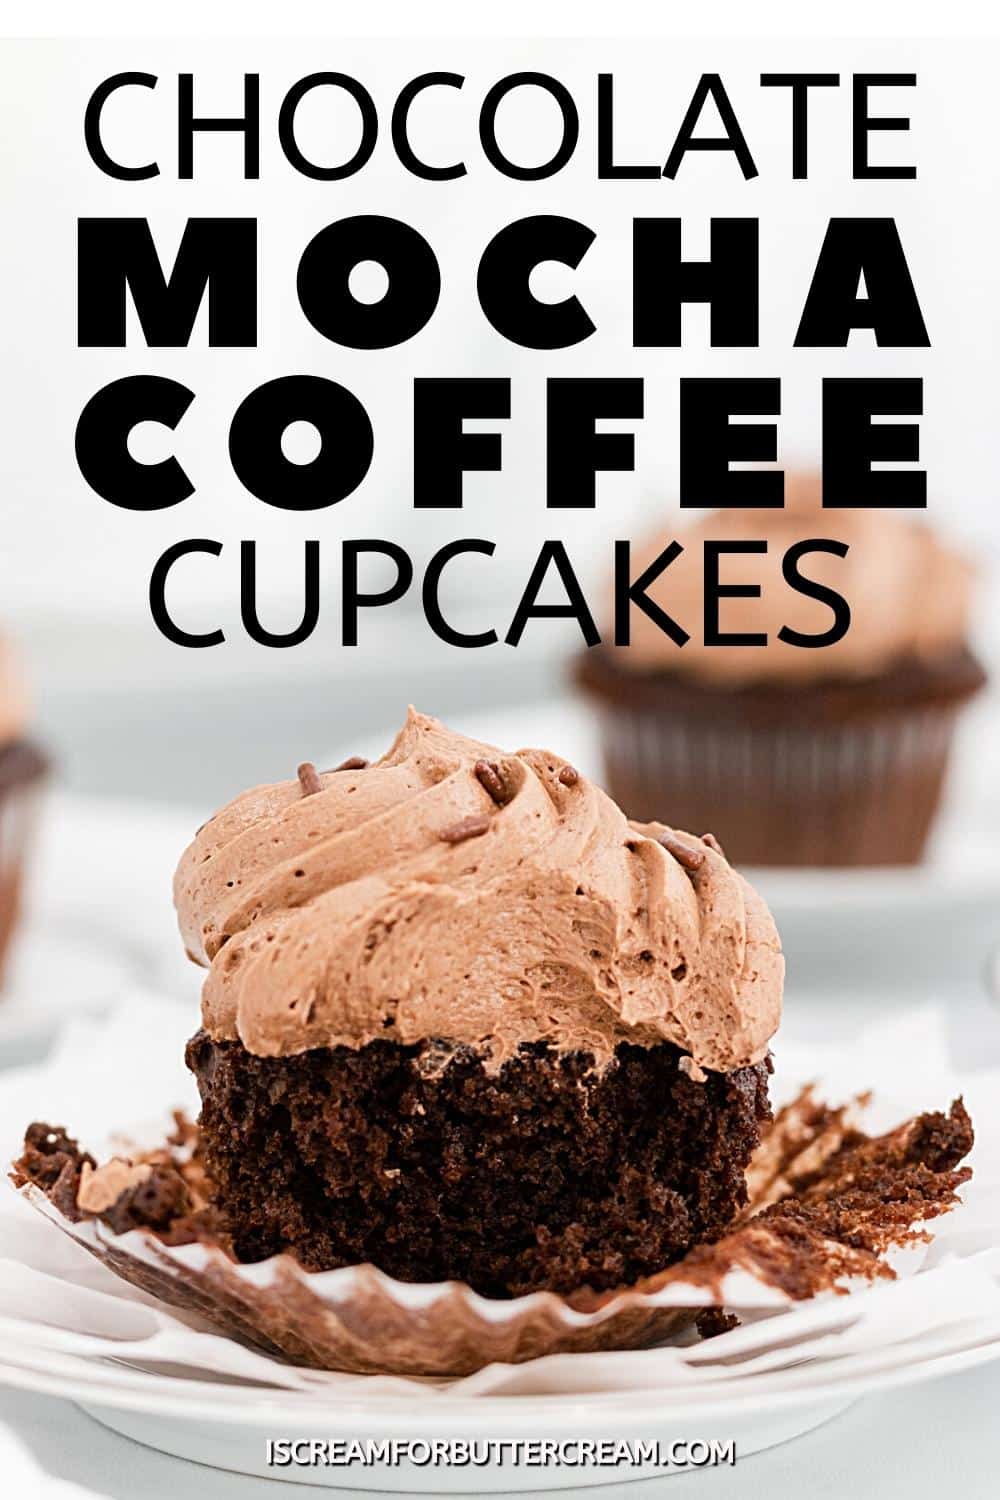 Chocolate mocha coffee cupcakes with icing pin graphic.